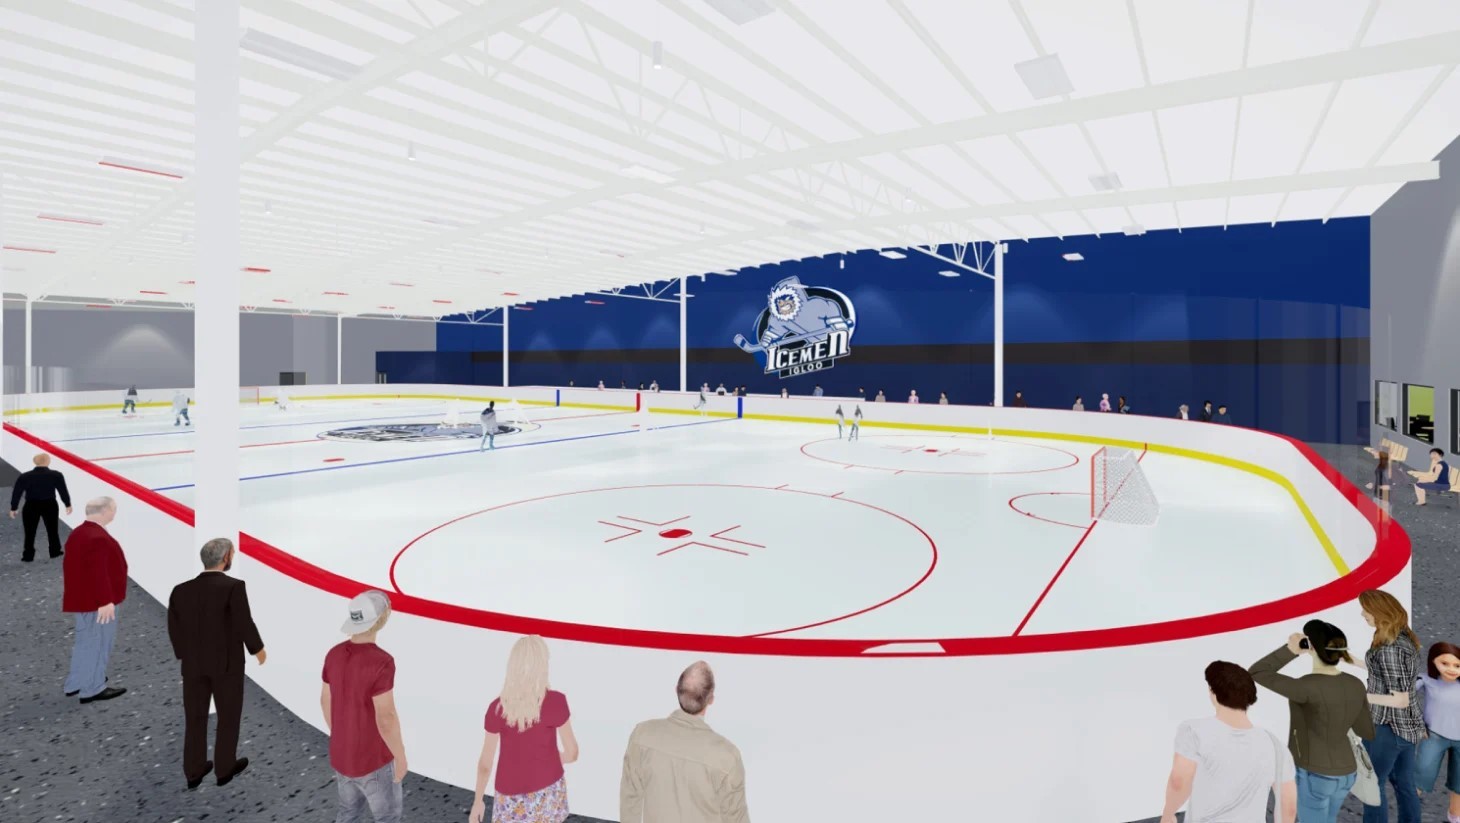 The Igloo's second ice rink will be built first so people can continue to skate at the facility during the renovations.